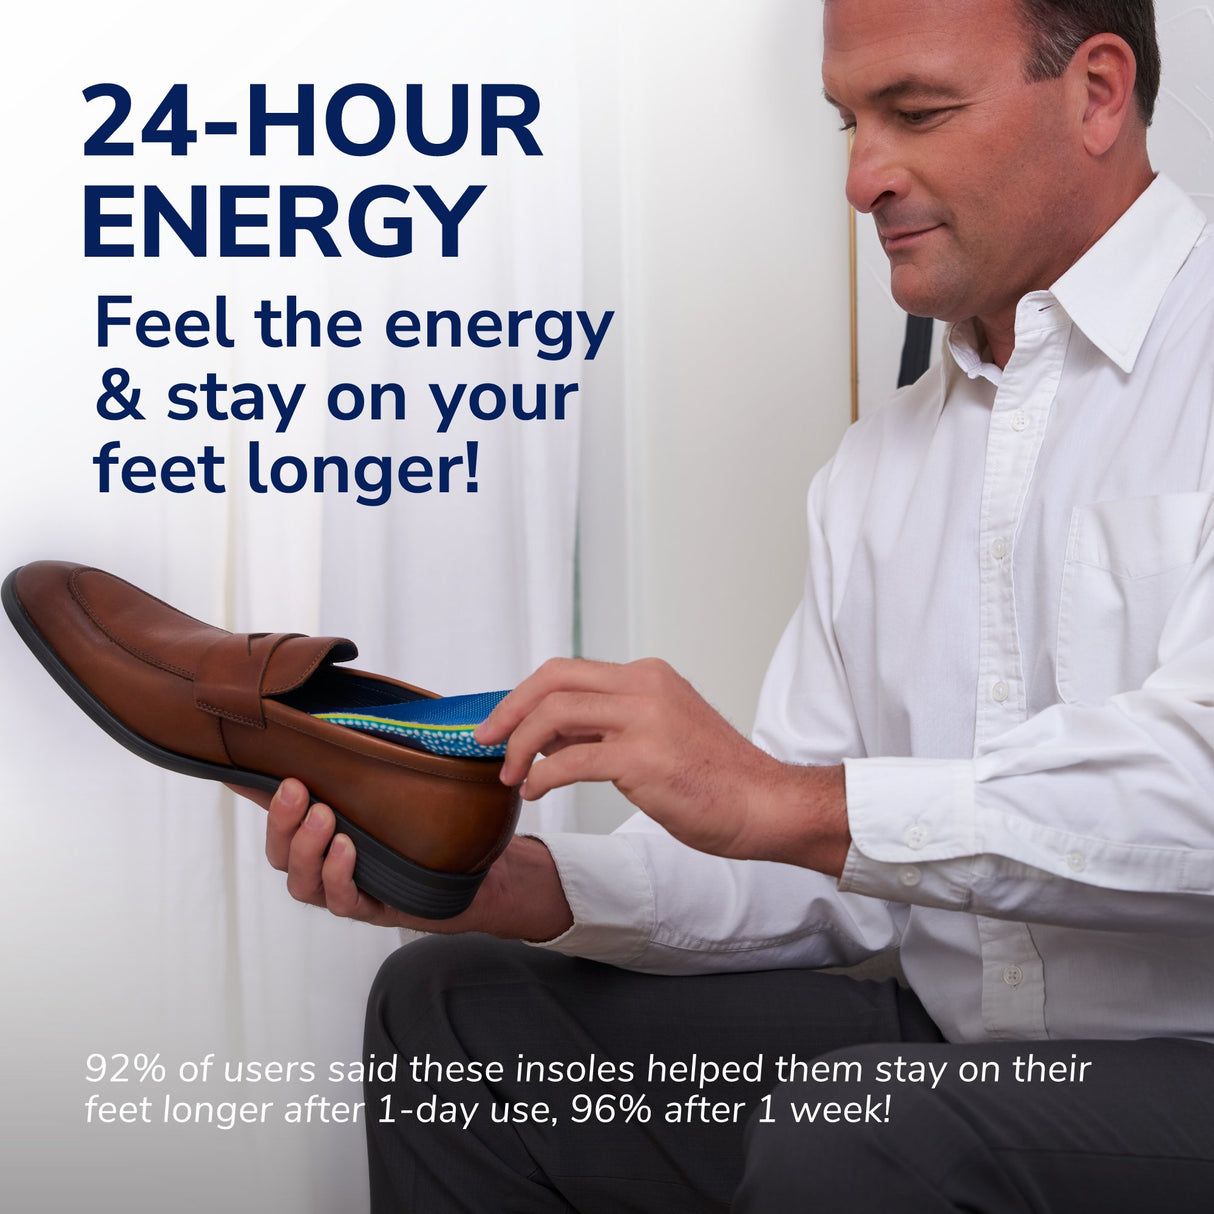 image of 24 hour energy feel the energy and stay on your feet longer